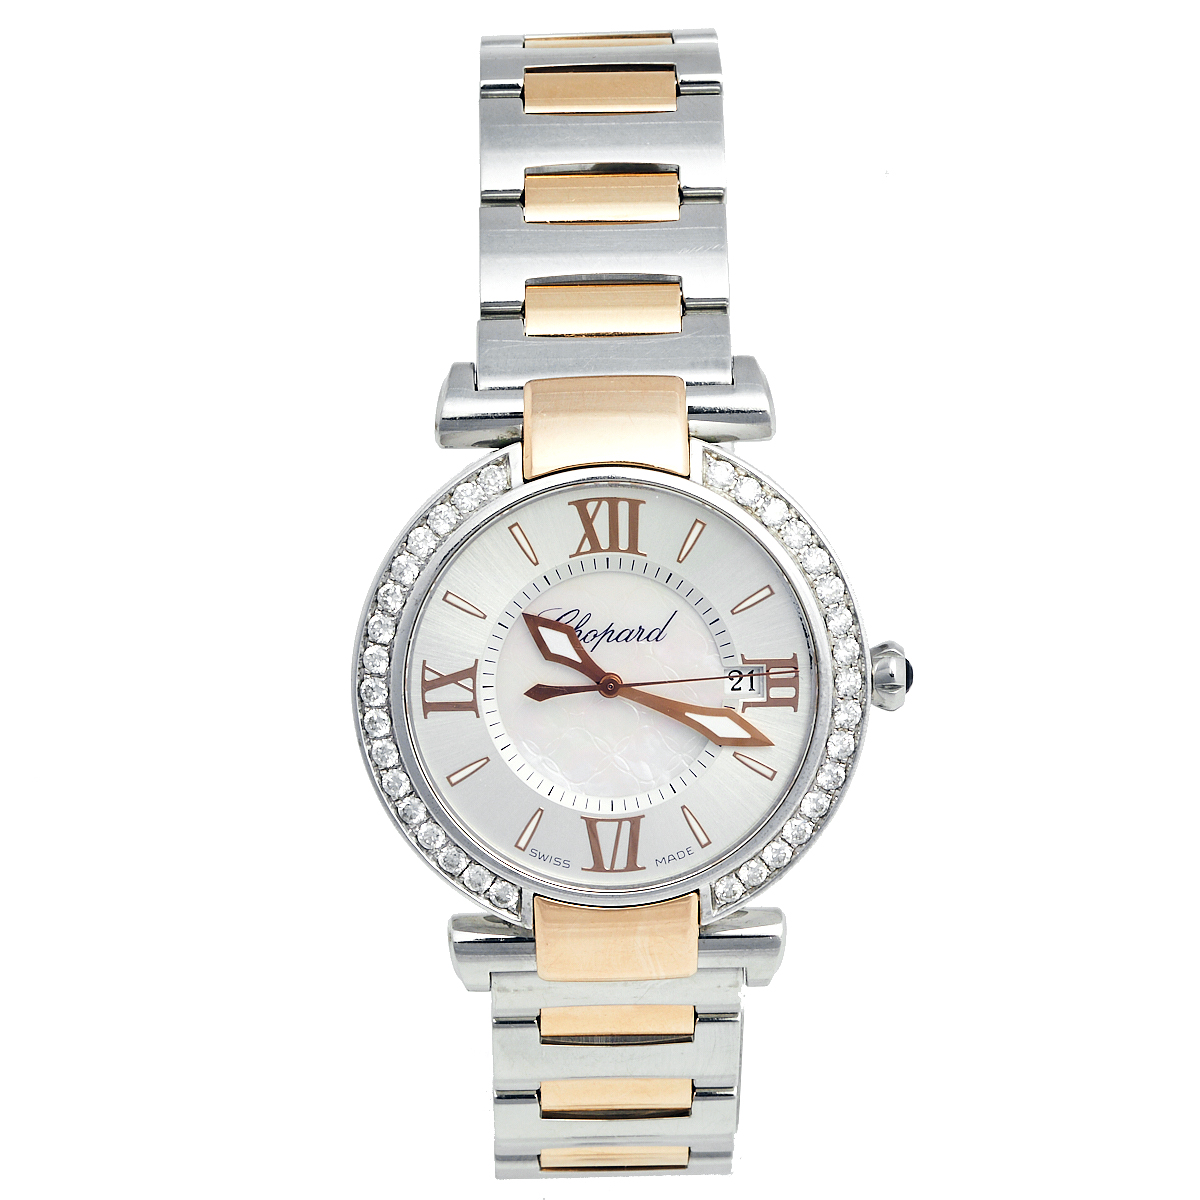 Chopard silver mother of pearl 18k rose gold stainless steel diamond imperiale 388532-6004 women's wristwatch 36 mm